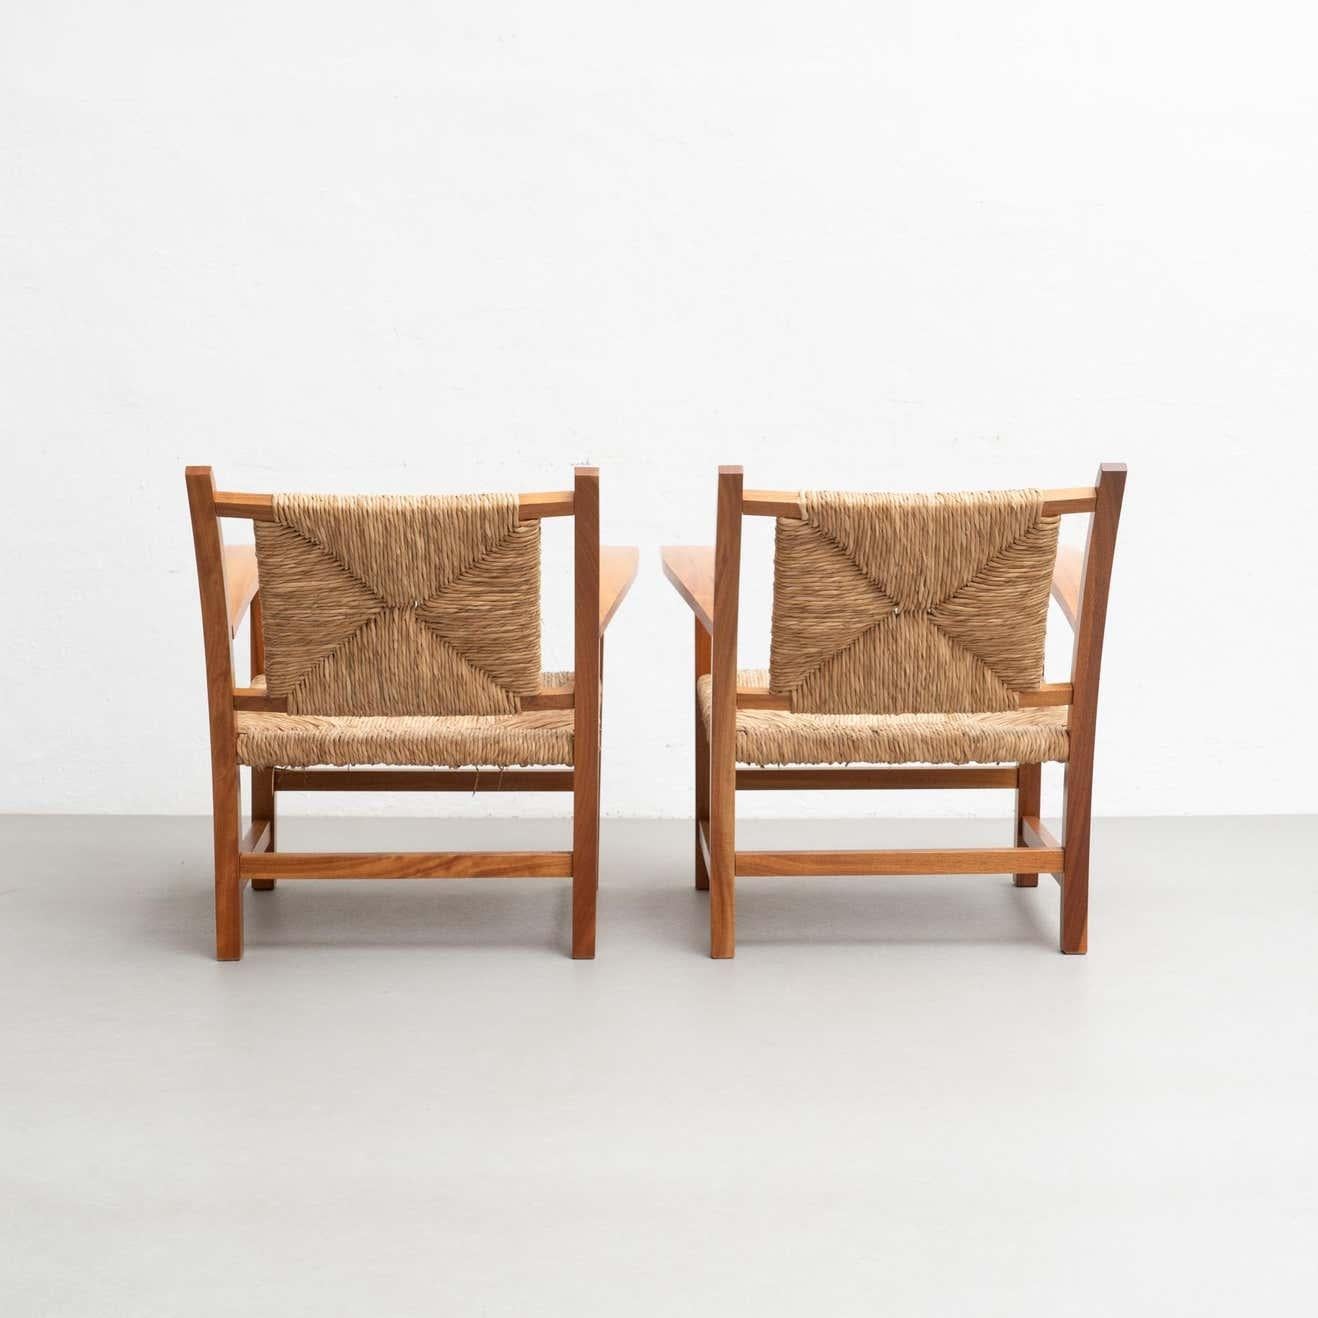 Late 20th Century Set of 2 Reedited Armchair Josep Torres Clave, circa 1987